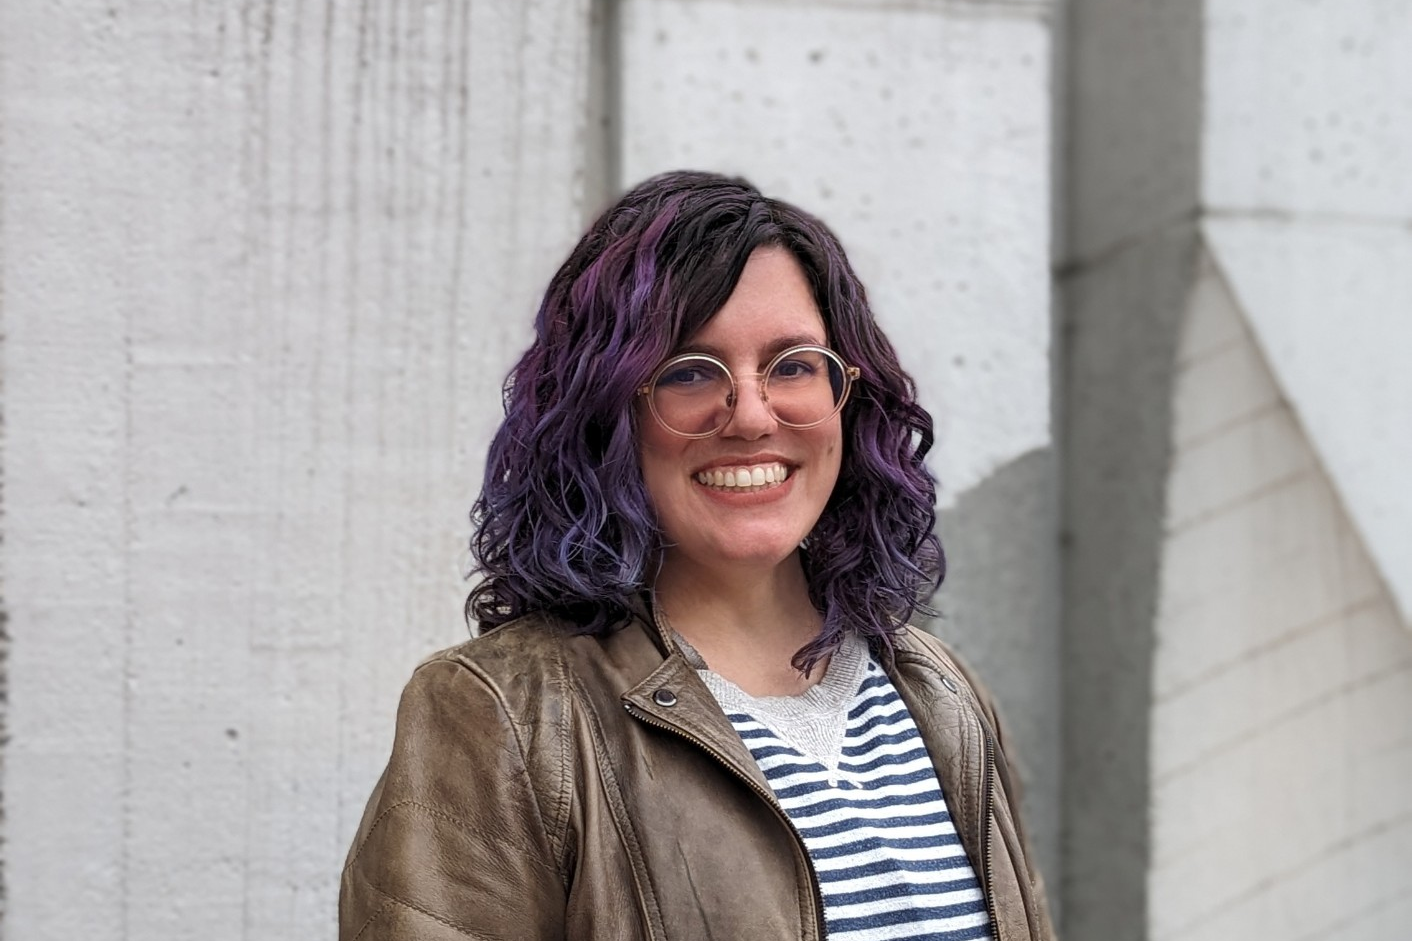 SFU Publishing senior lecturer Mauve Pagé wins Excellence in Teaching Award